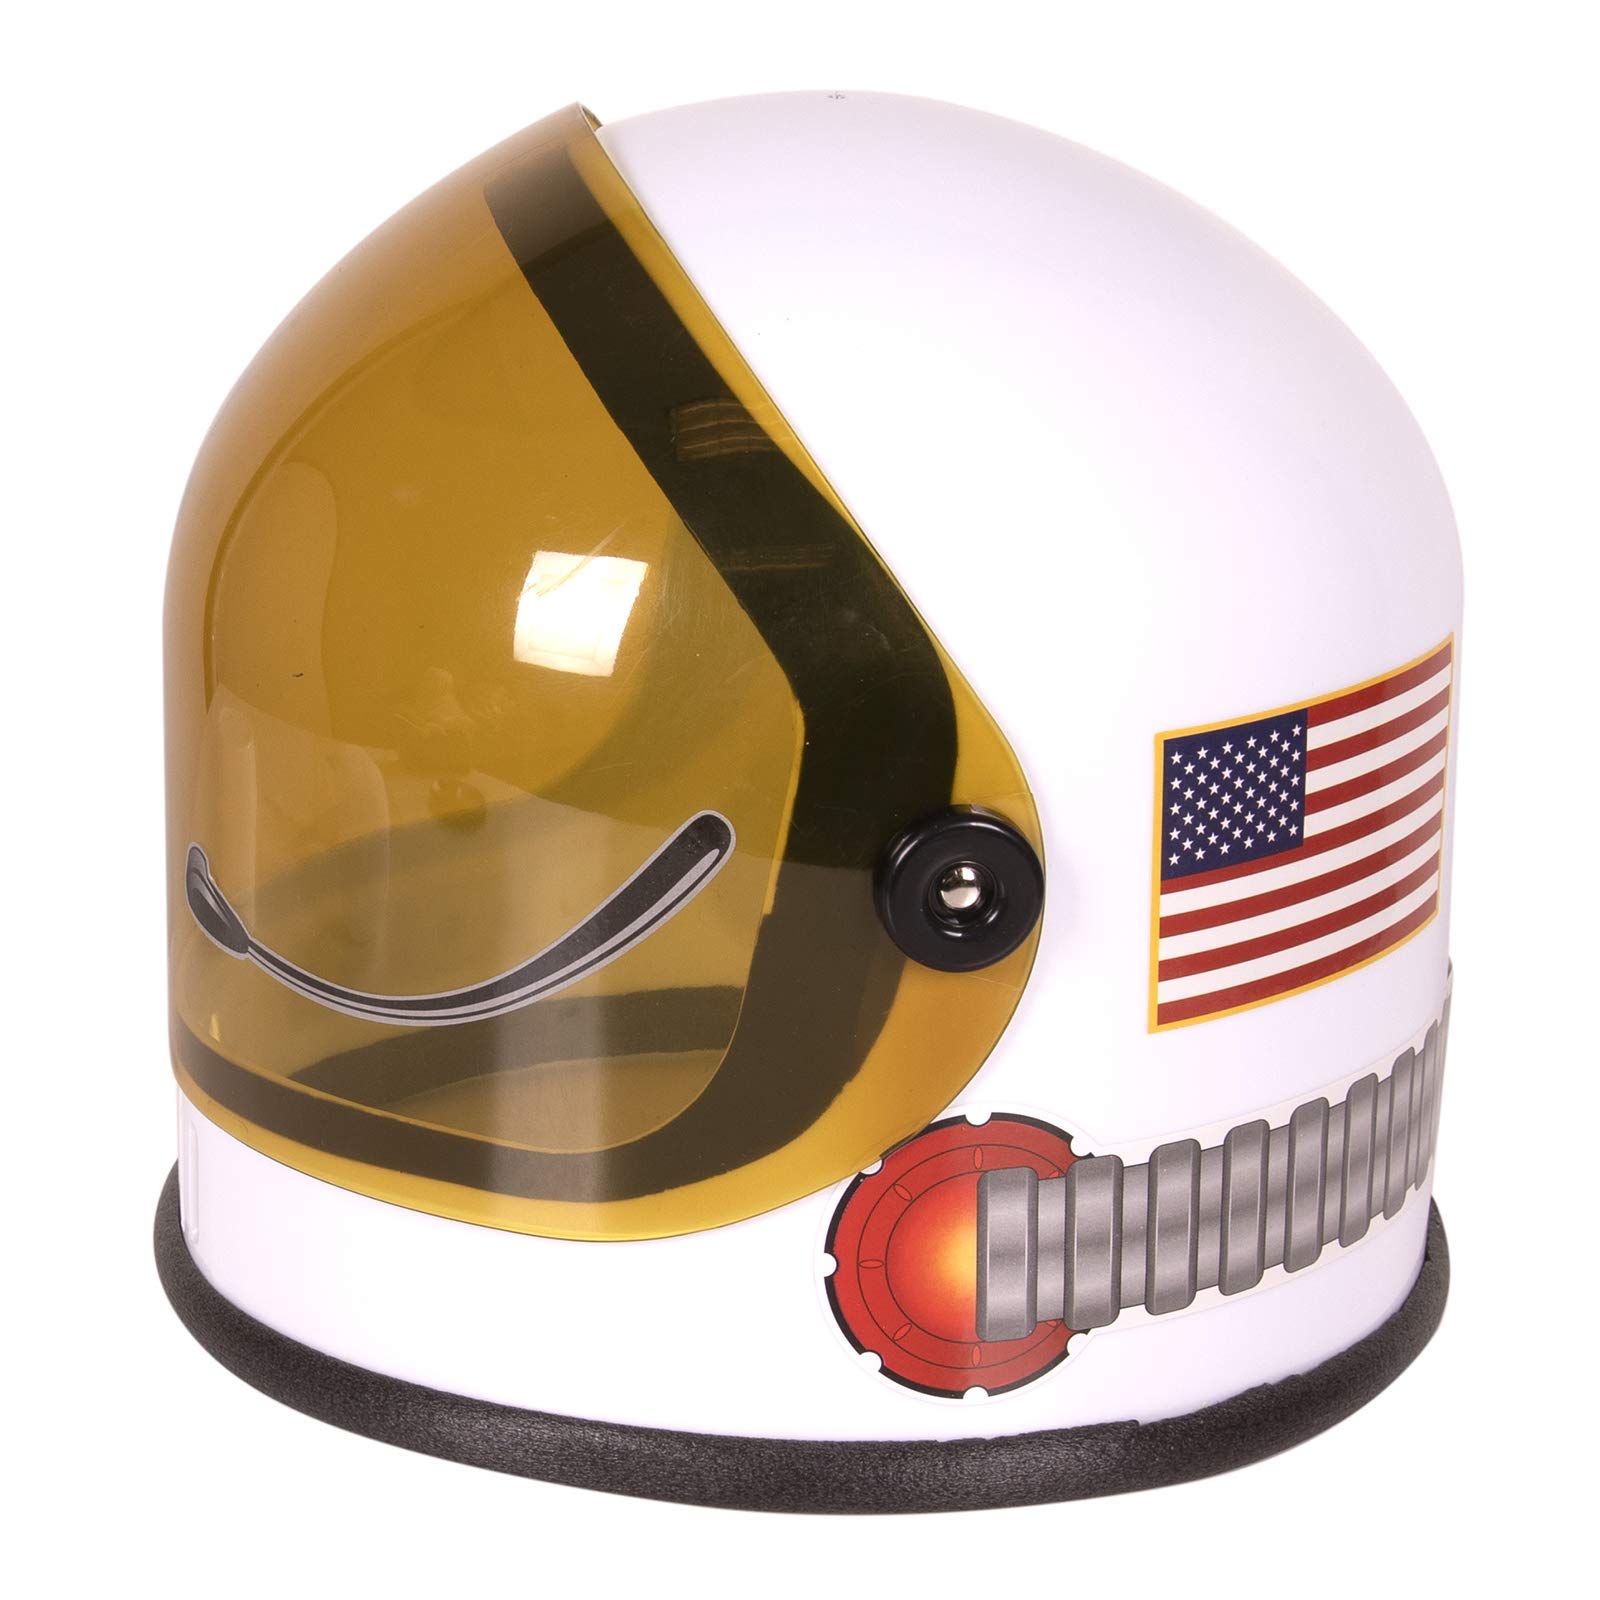 Astronaut Helmet with Movable Visor - Pretend & Play Toy for Dress Up Fun, Role Play Accessory, Birthday Party Favor Supplies, Girls, Boys, Kids and Toddler. White